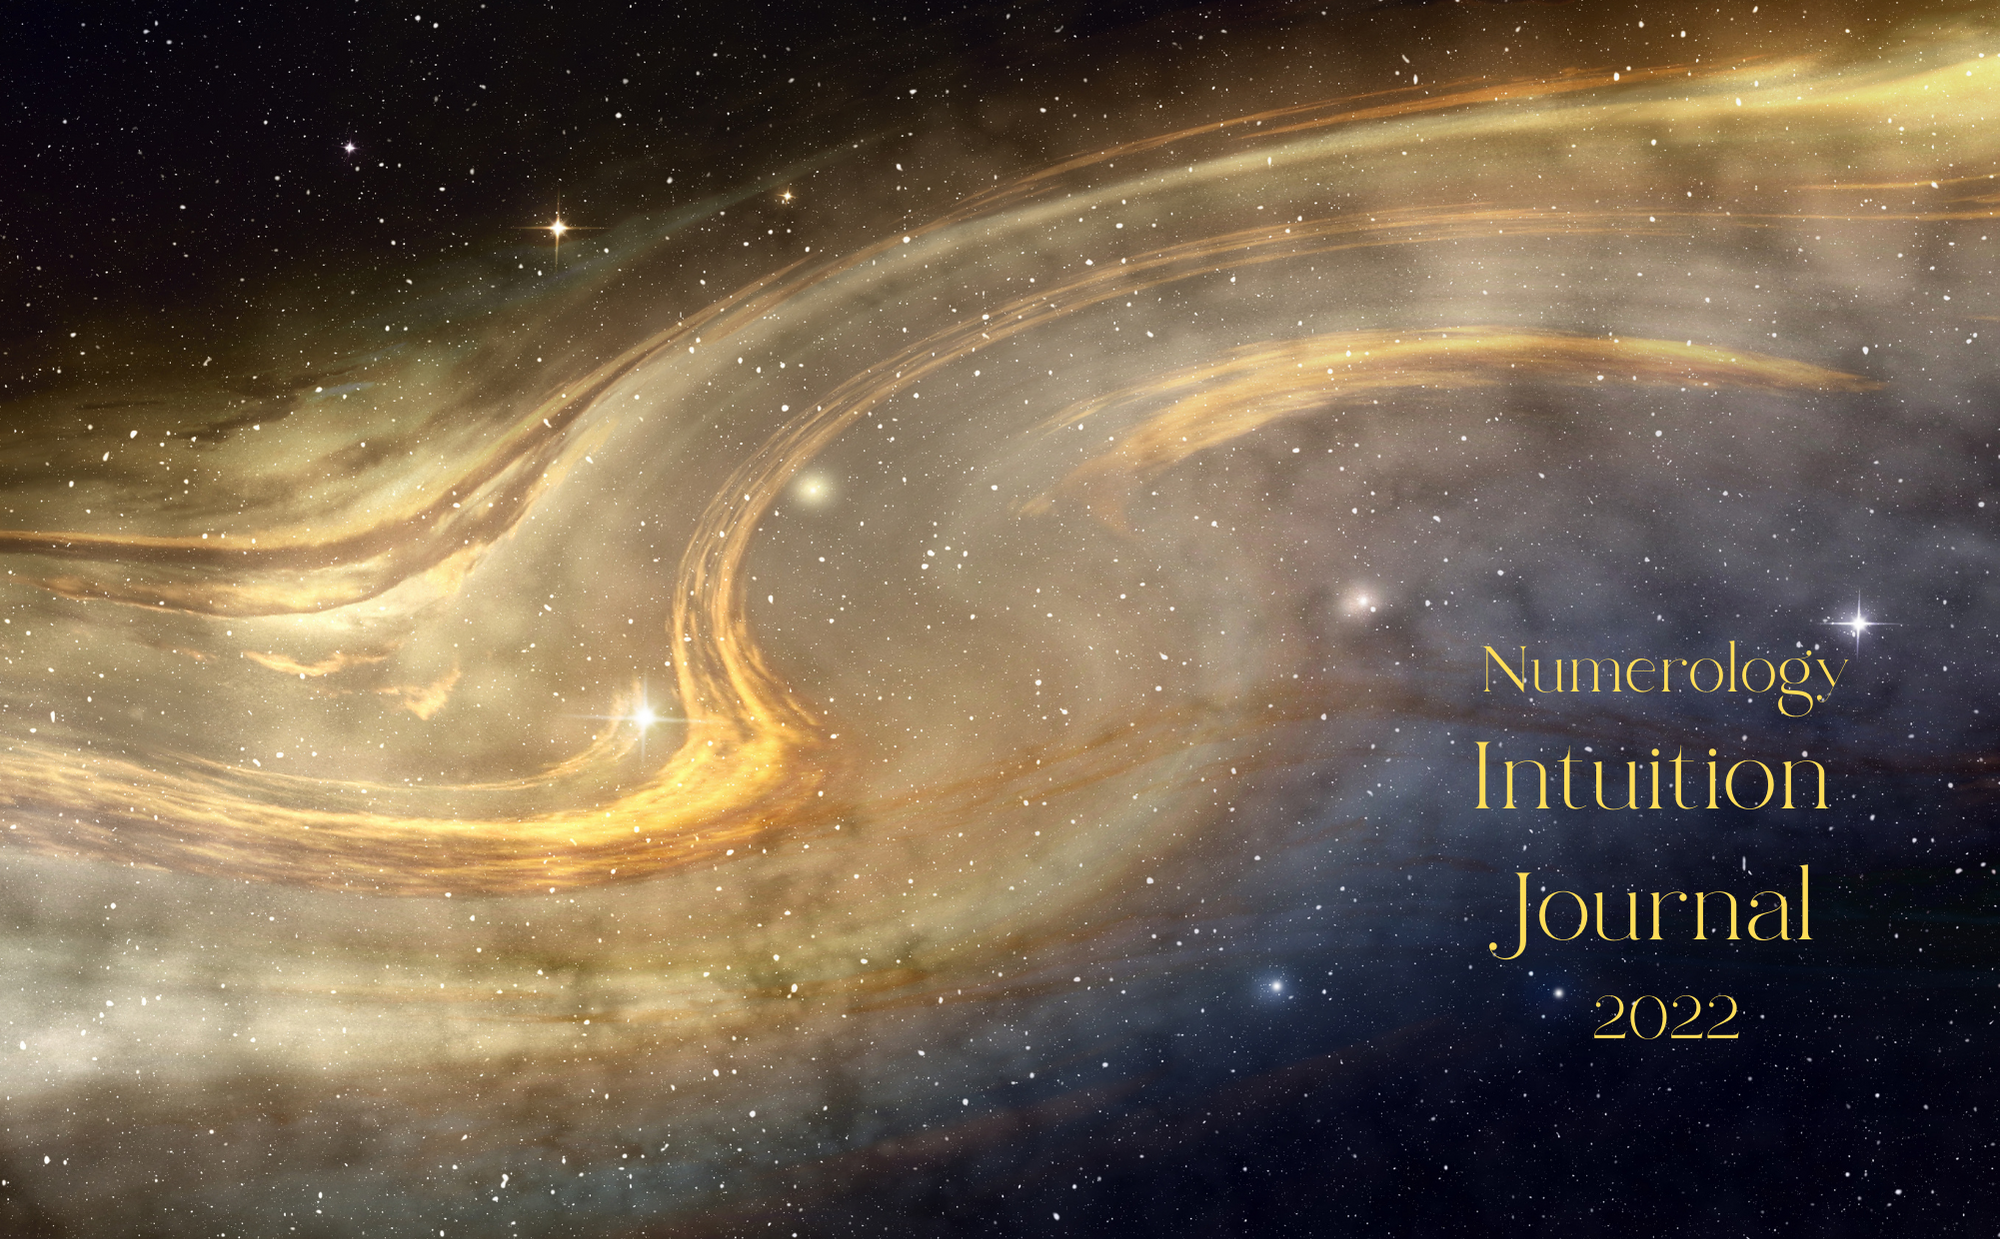 Numerology Intuition Journal